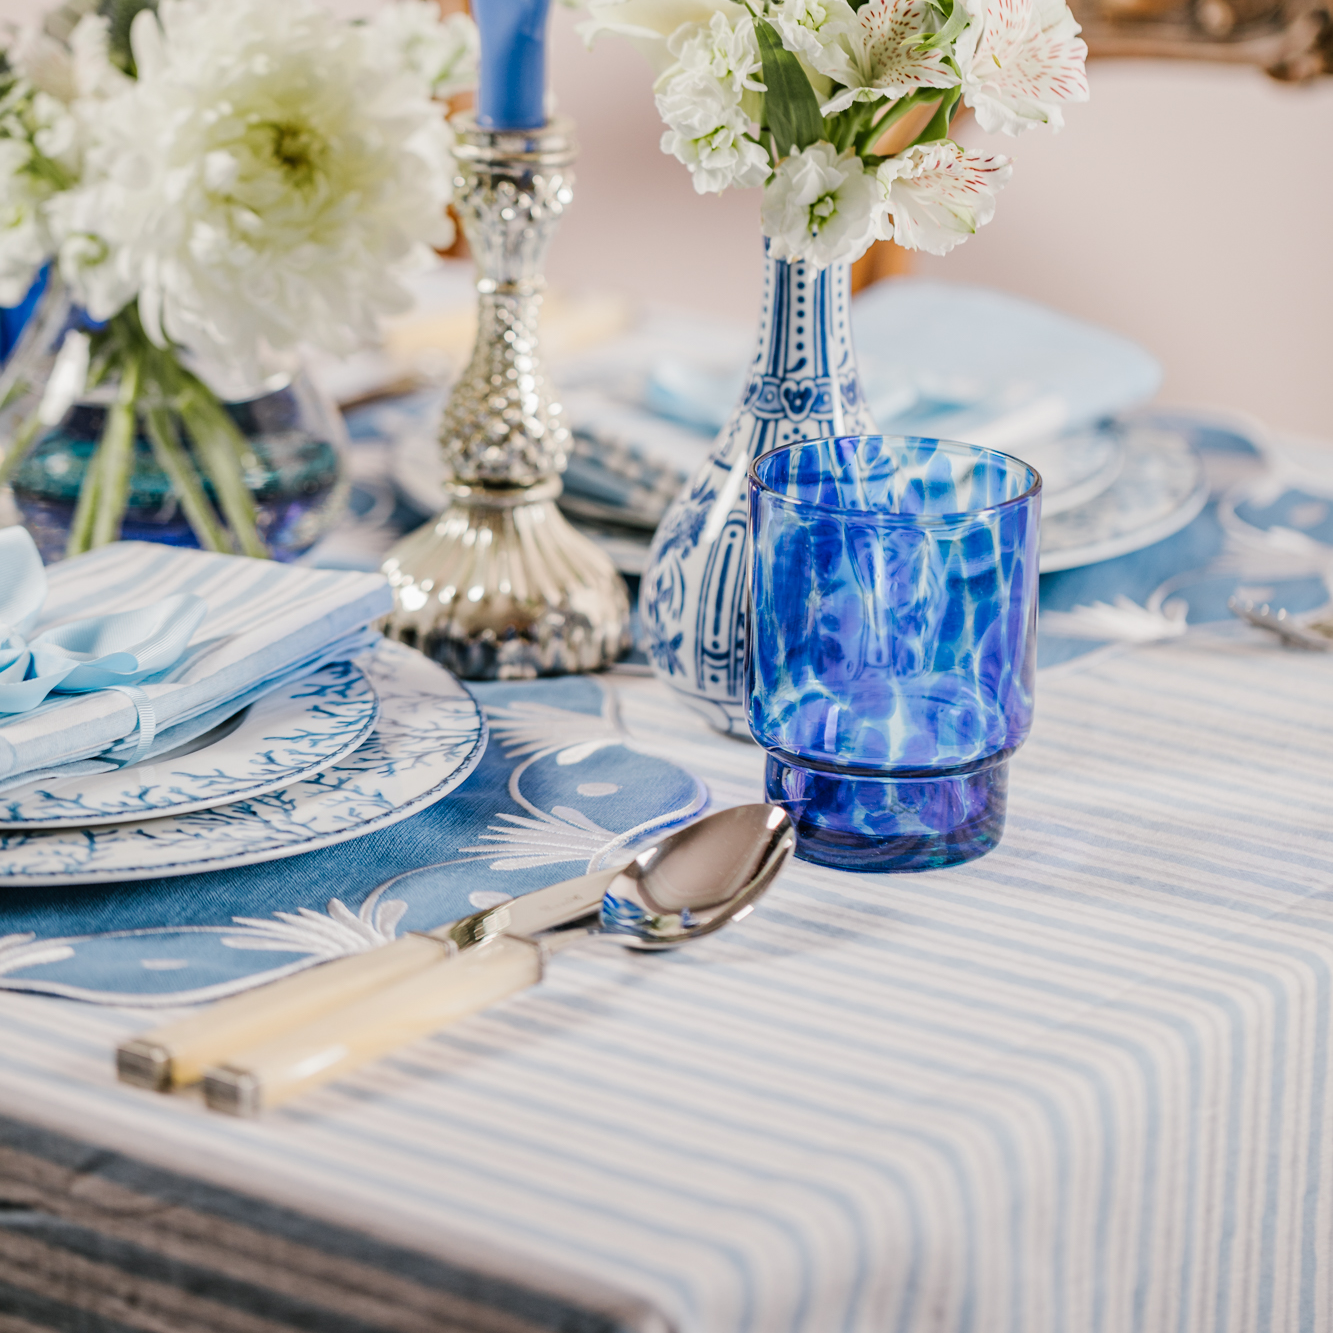 Bluebell Stripe Tablecloth